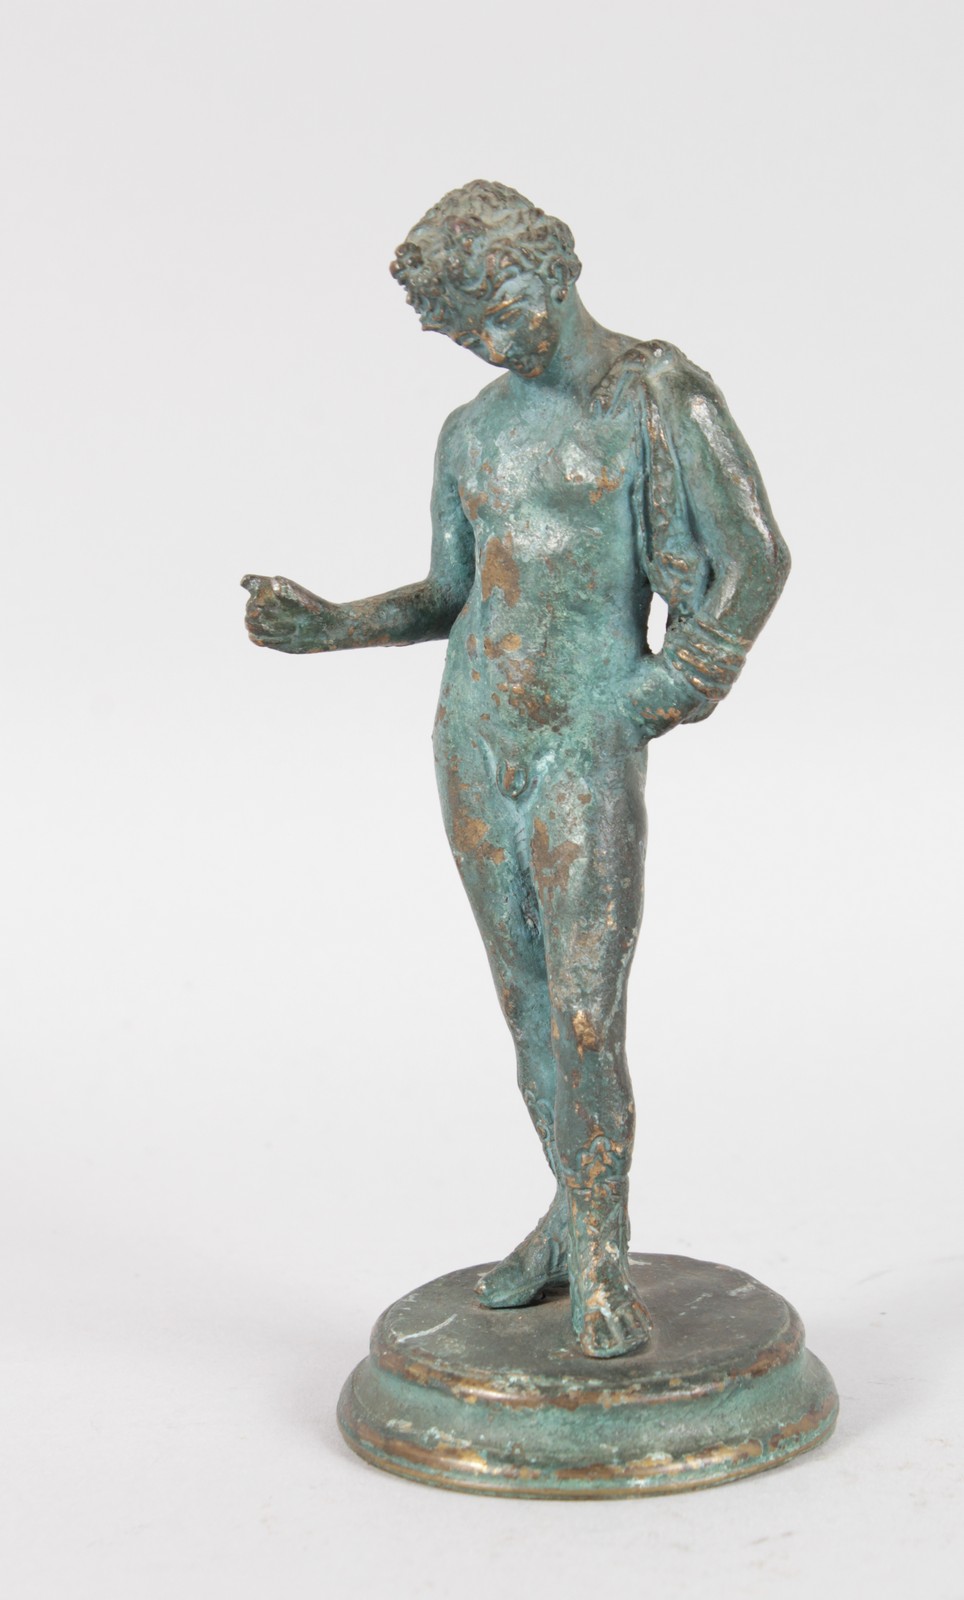 AFTER THE ANTIQUE A STANDING NUDE CLASSICAL YOUNG BOY on a circular base. 5.5ins high.